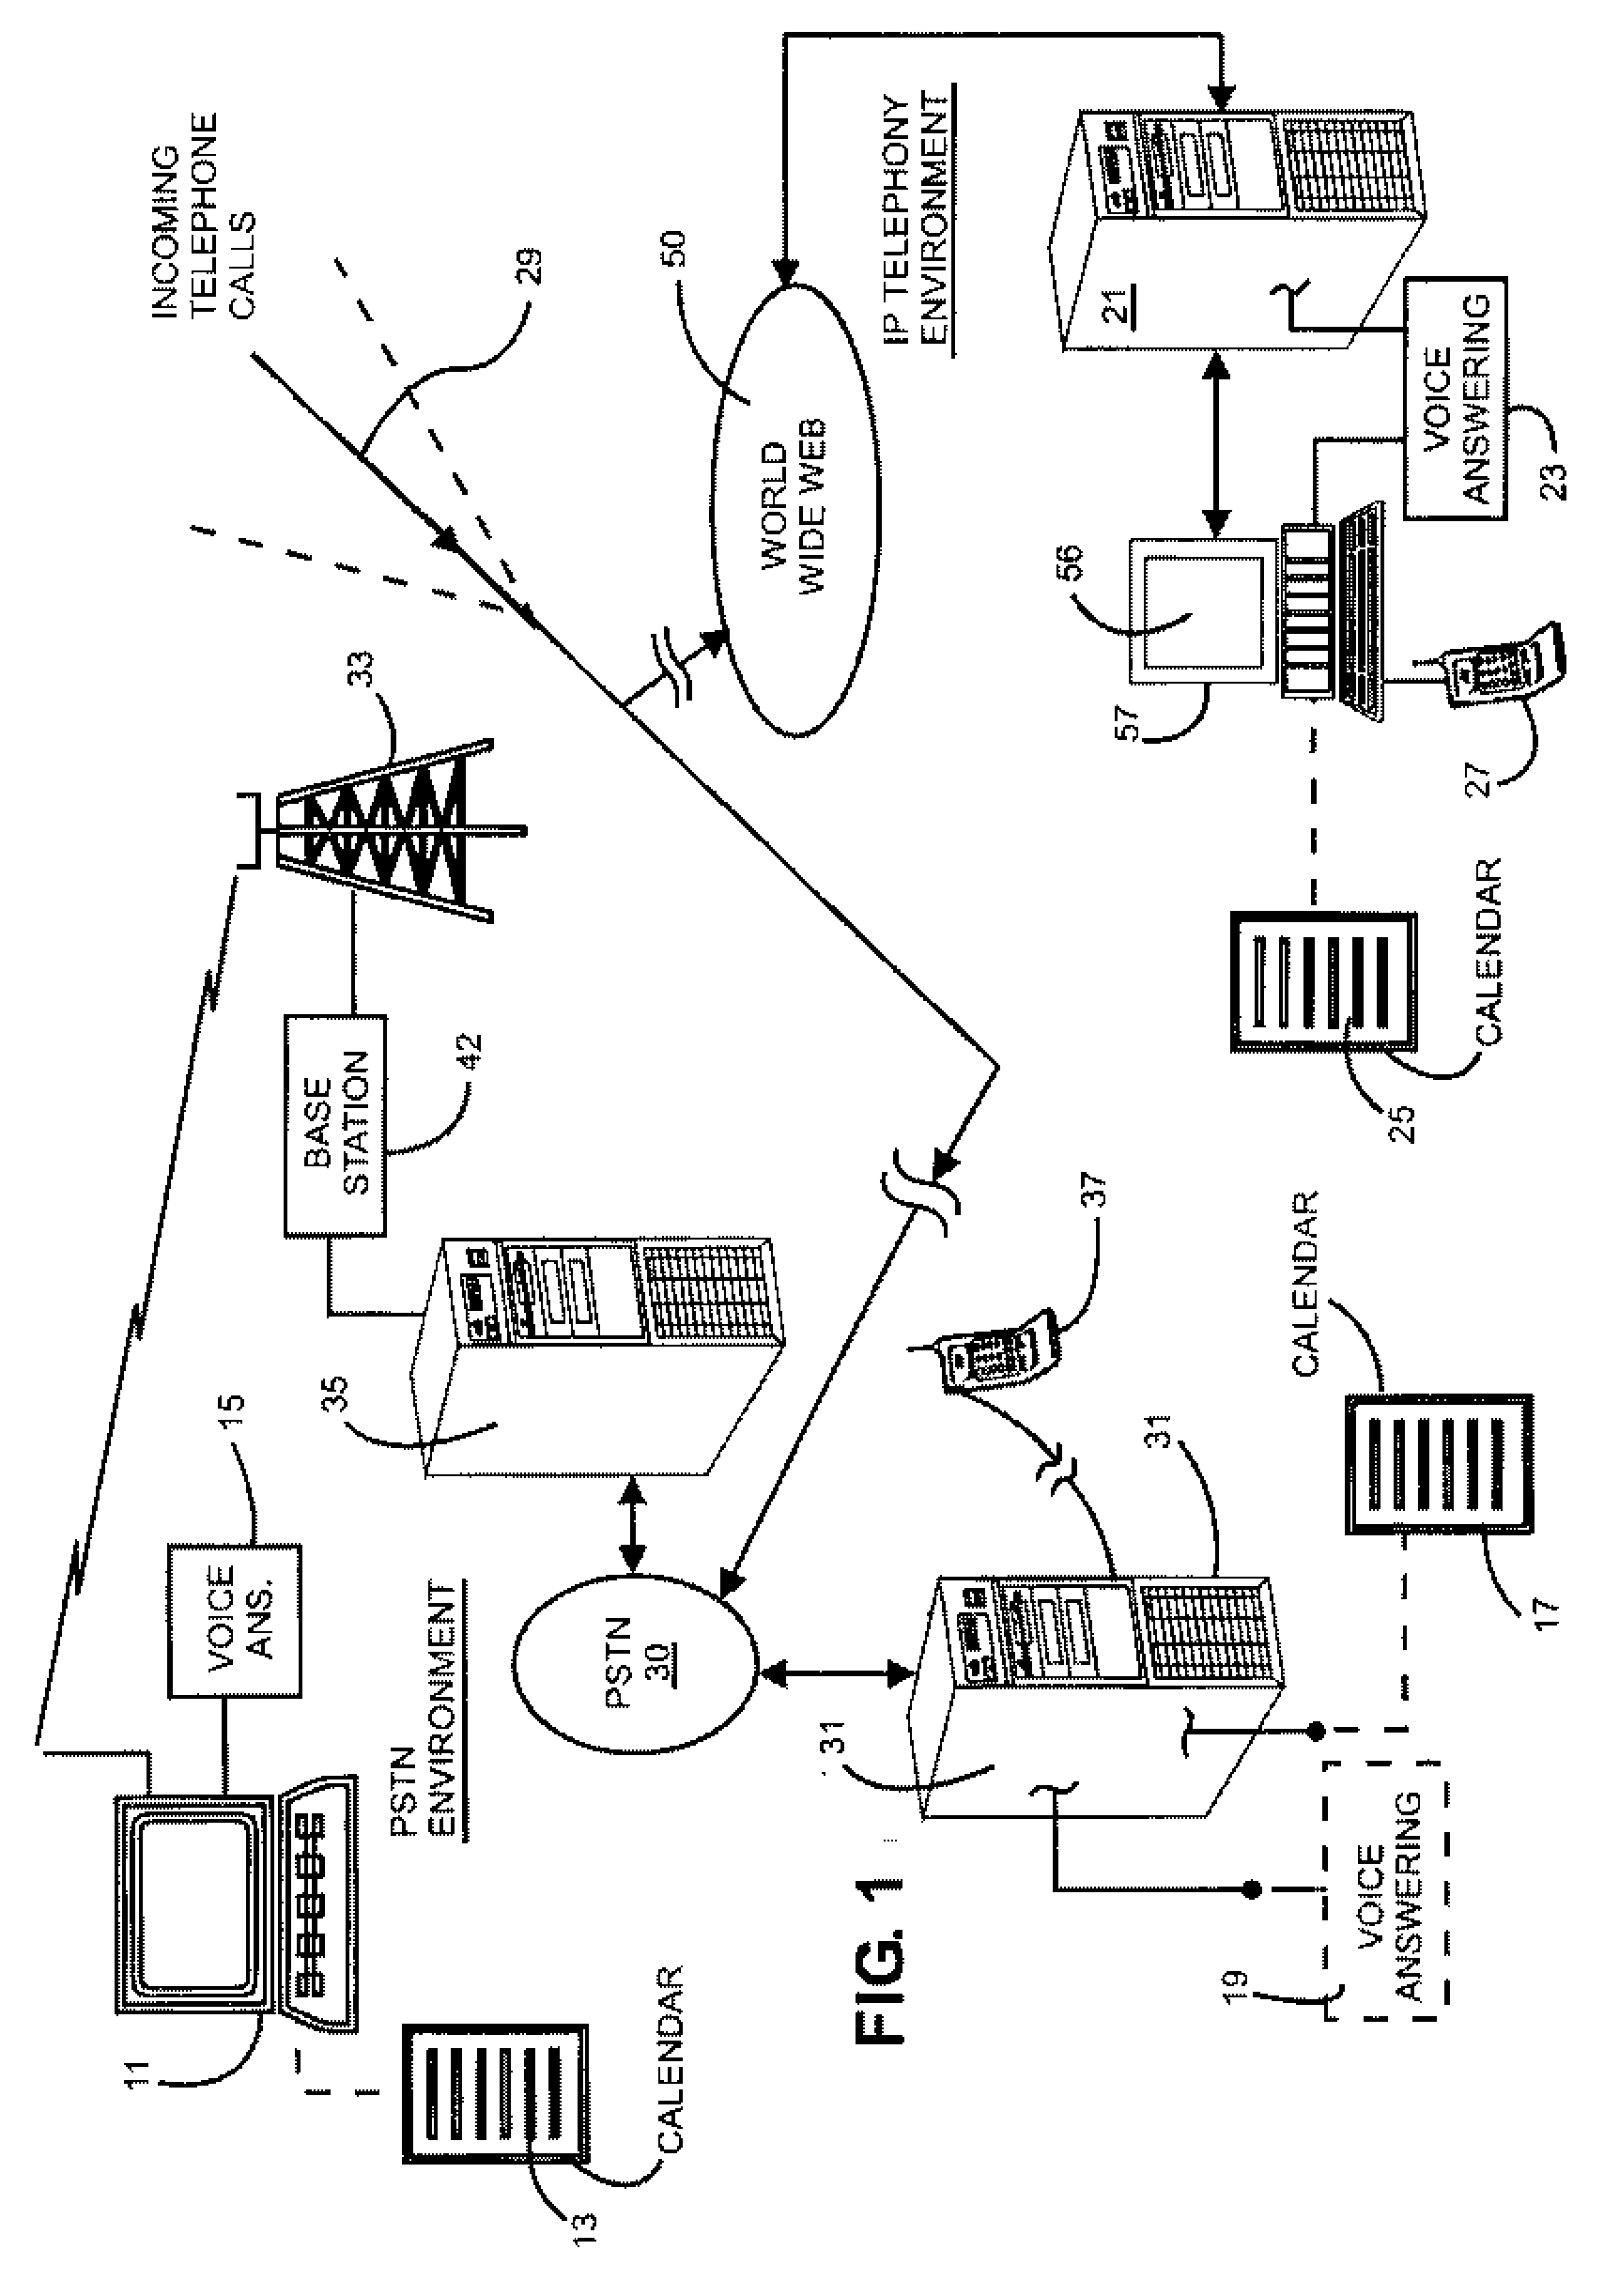 Automated voice answering system correlated to user calendar to provide telephone voice responses based upon user schedule